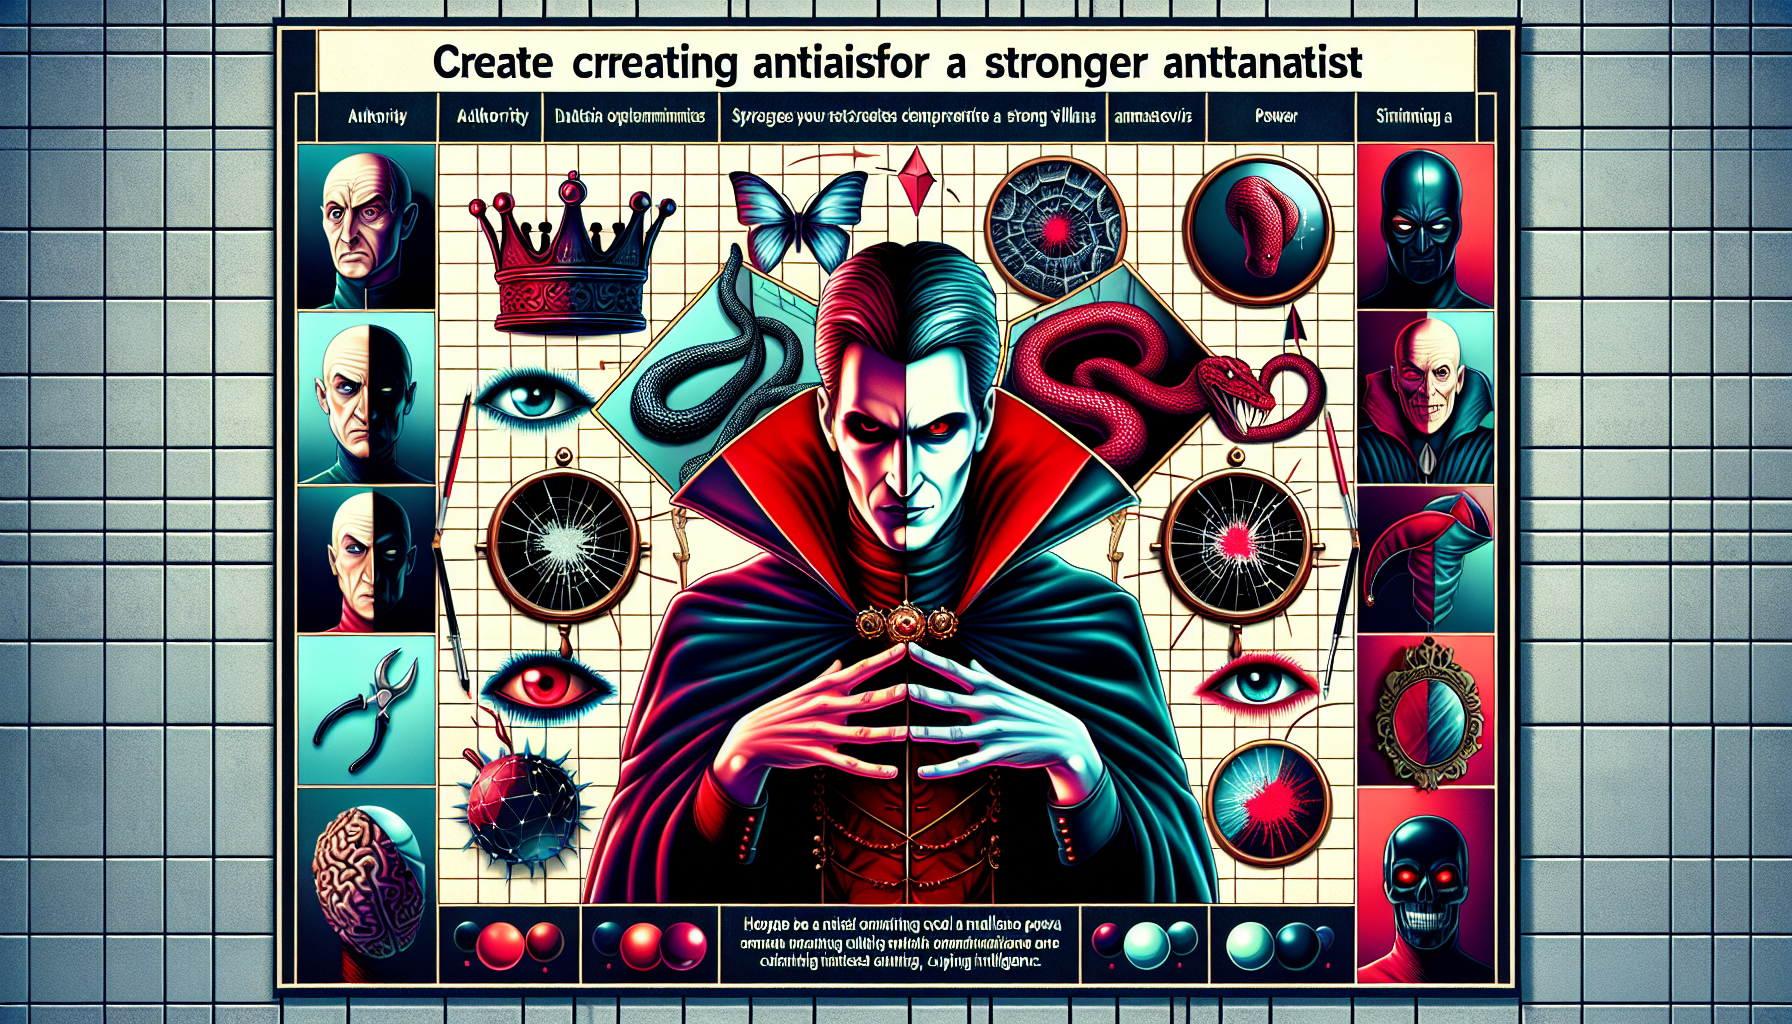 Create a photorealistic image that represents strategies for creating a stronger antagonist in a visually compelling way. The illustration should reflect modern artistic sensibilities and make use of vibrant colors. There should be various elements symbolizing the traits of a complex villain: perhaps a dark crown to represent authority, a shattered mirror for duality or deceit, a venomous snake as a symbol of danger, a red cape to denote power, and sinister, cold eyes displaying cunning intelligence. Remember, there should be no words within the image.